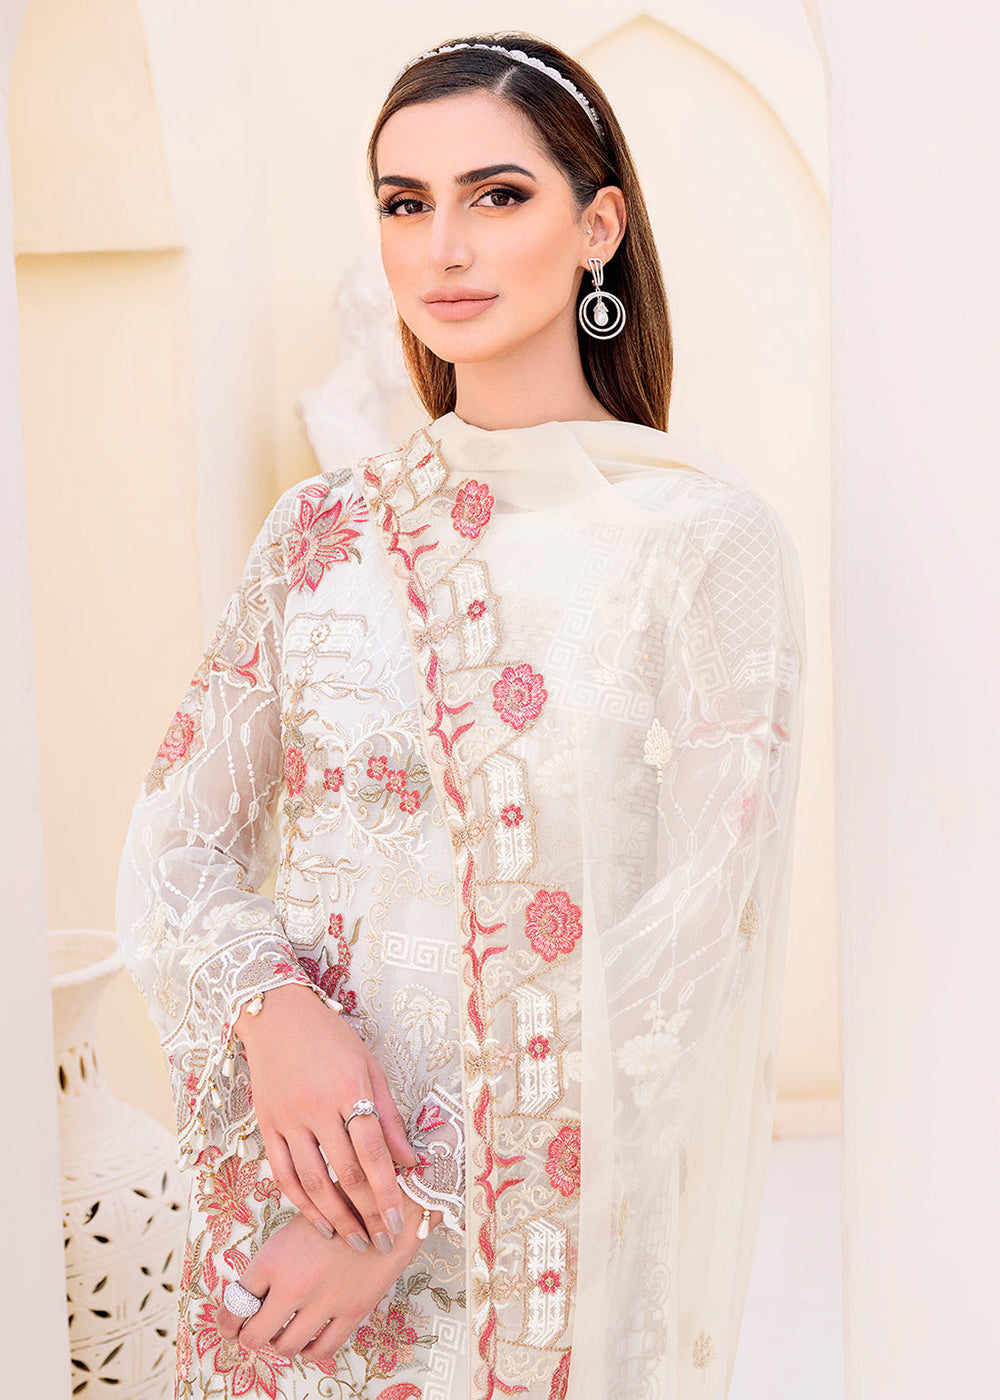 Buy Now White Embroidered Suit - Chiffon Vol 23 by Ramsha - #F-2308 Online in USA, UK, Canada & Worldwide at Empress Clothing.